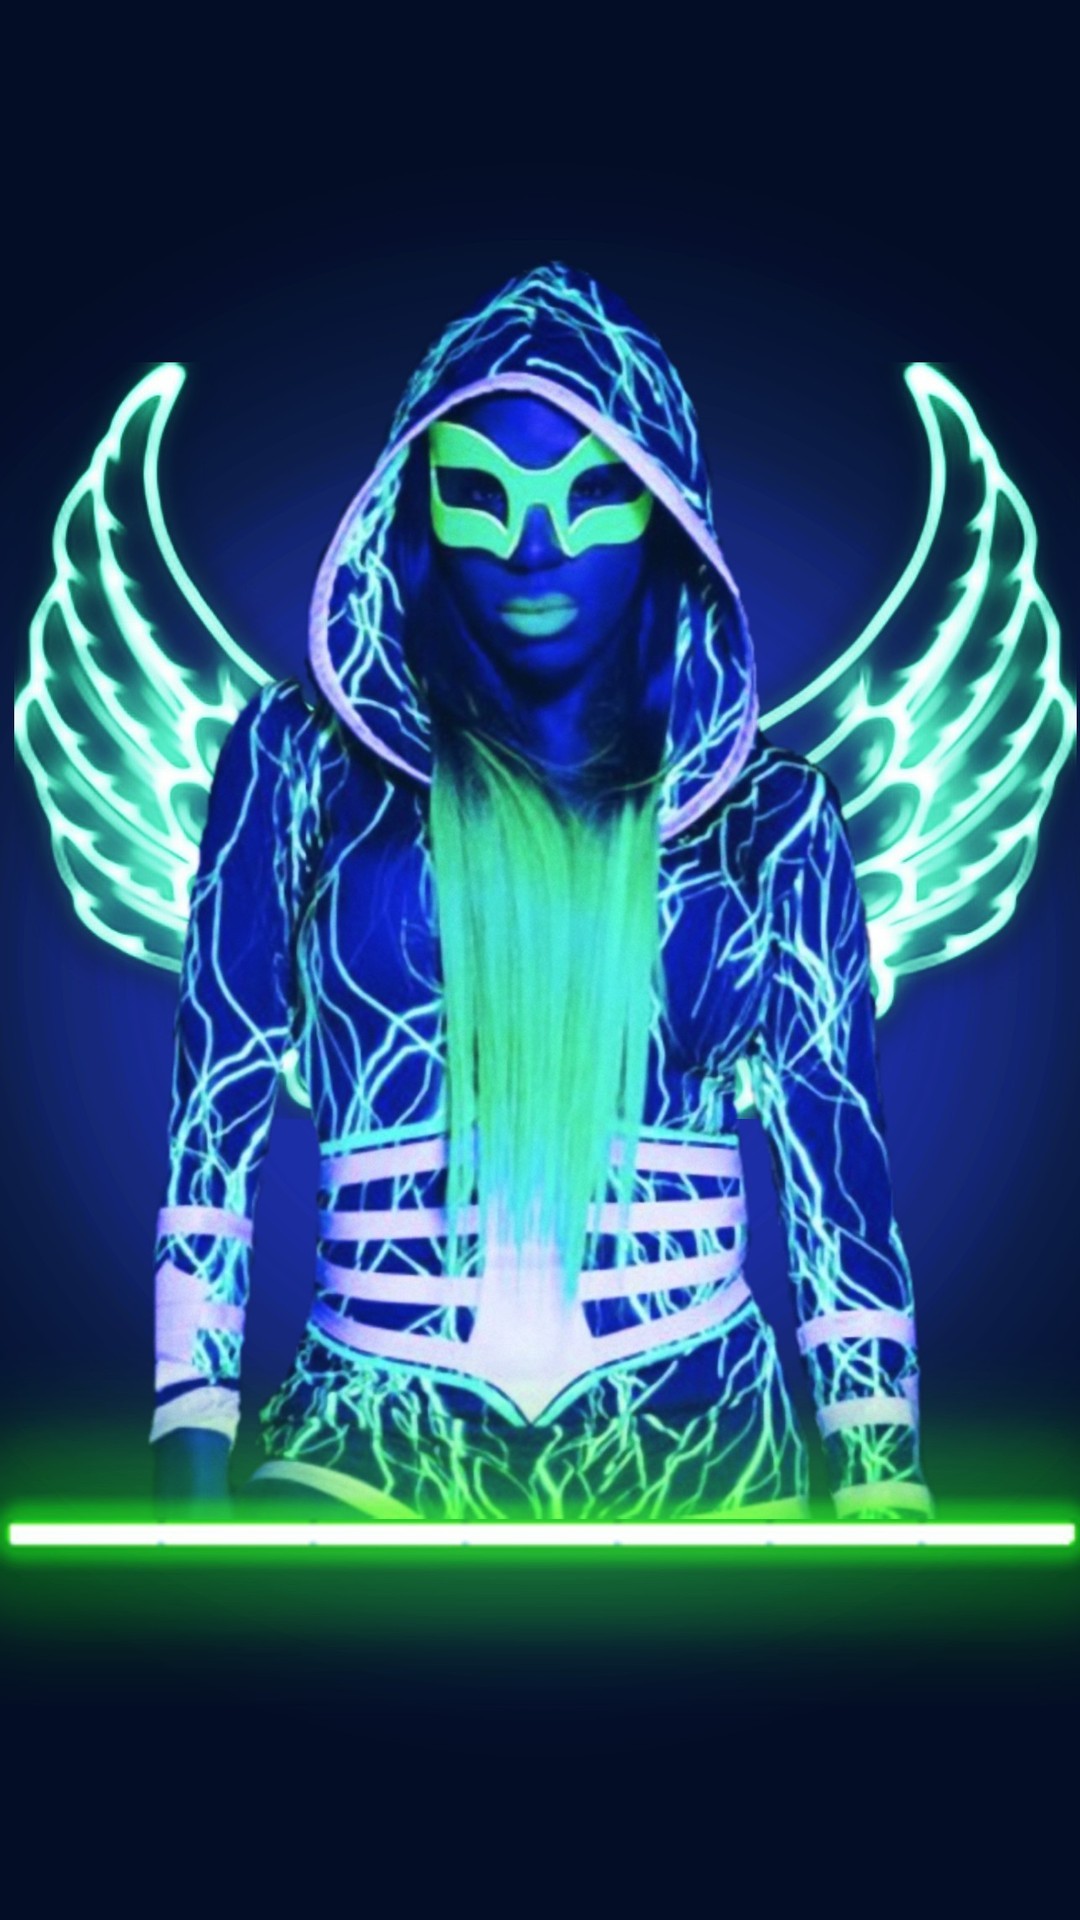 Naomi Wwe Wallpaper Posted By Michelle Sellers